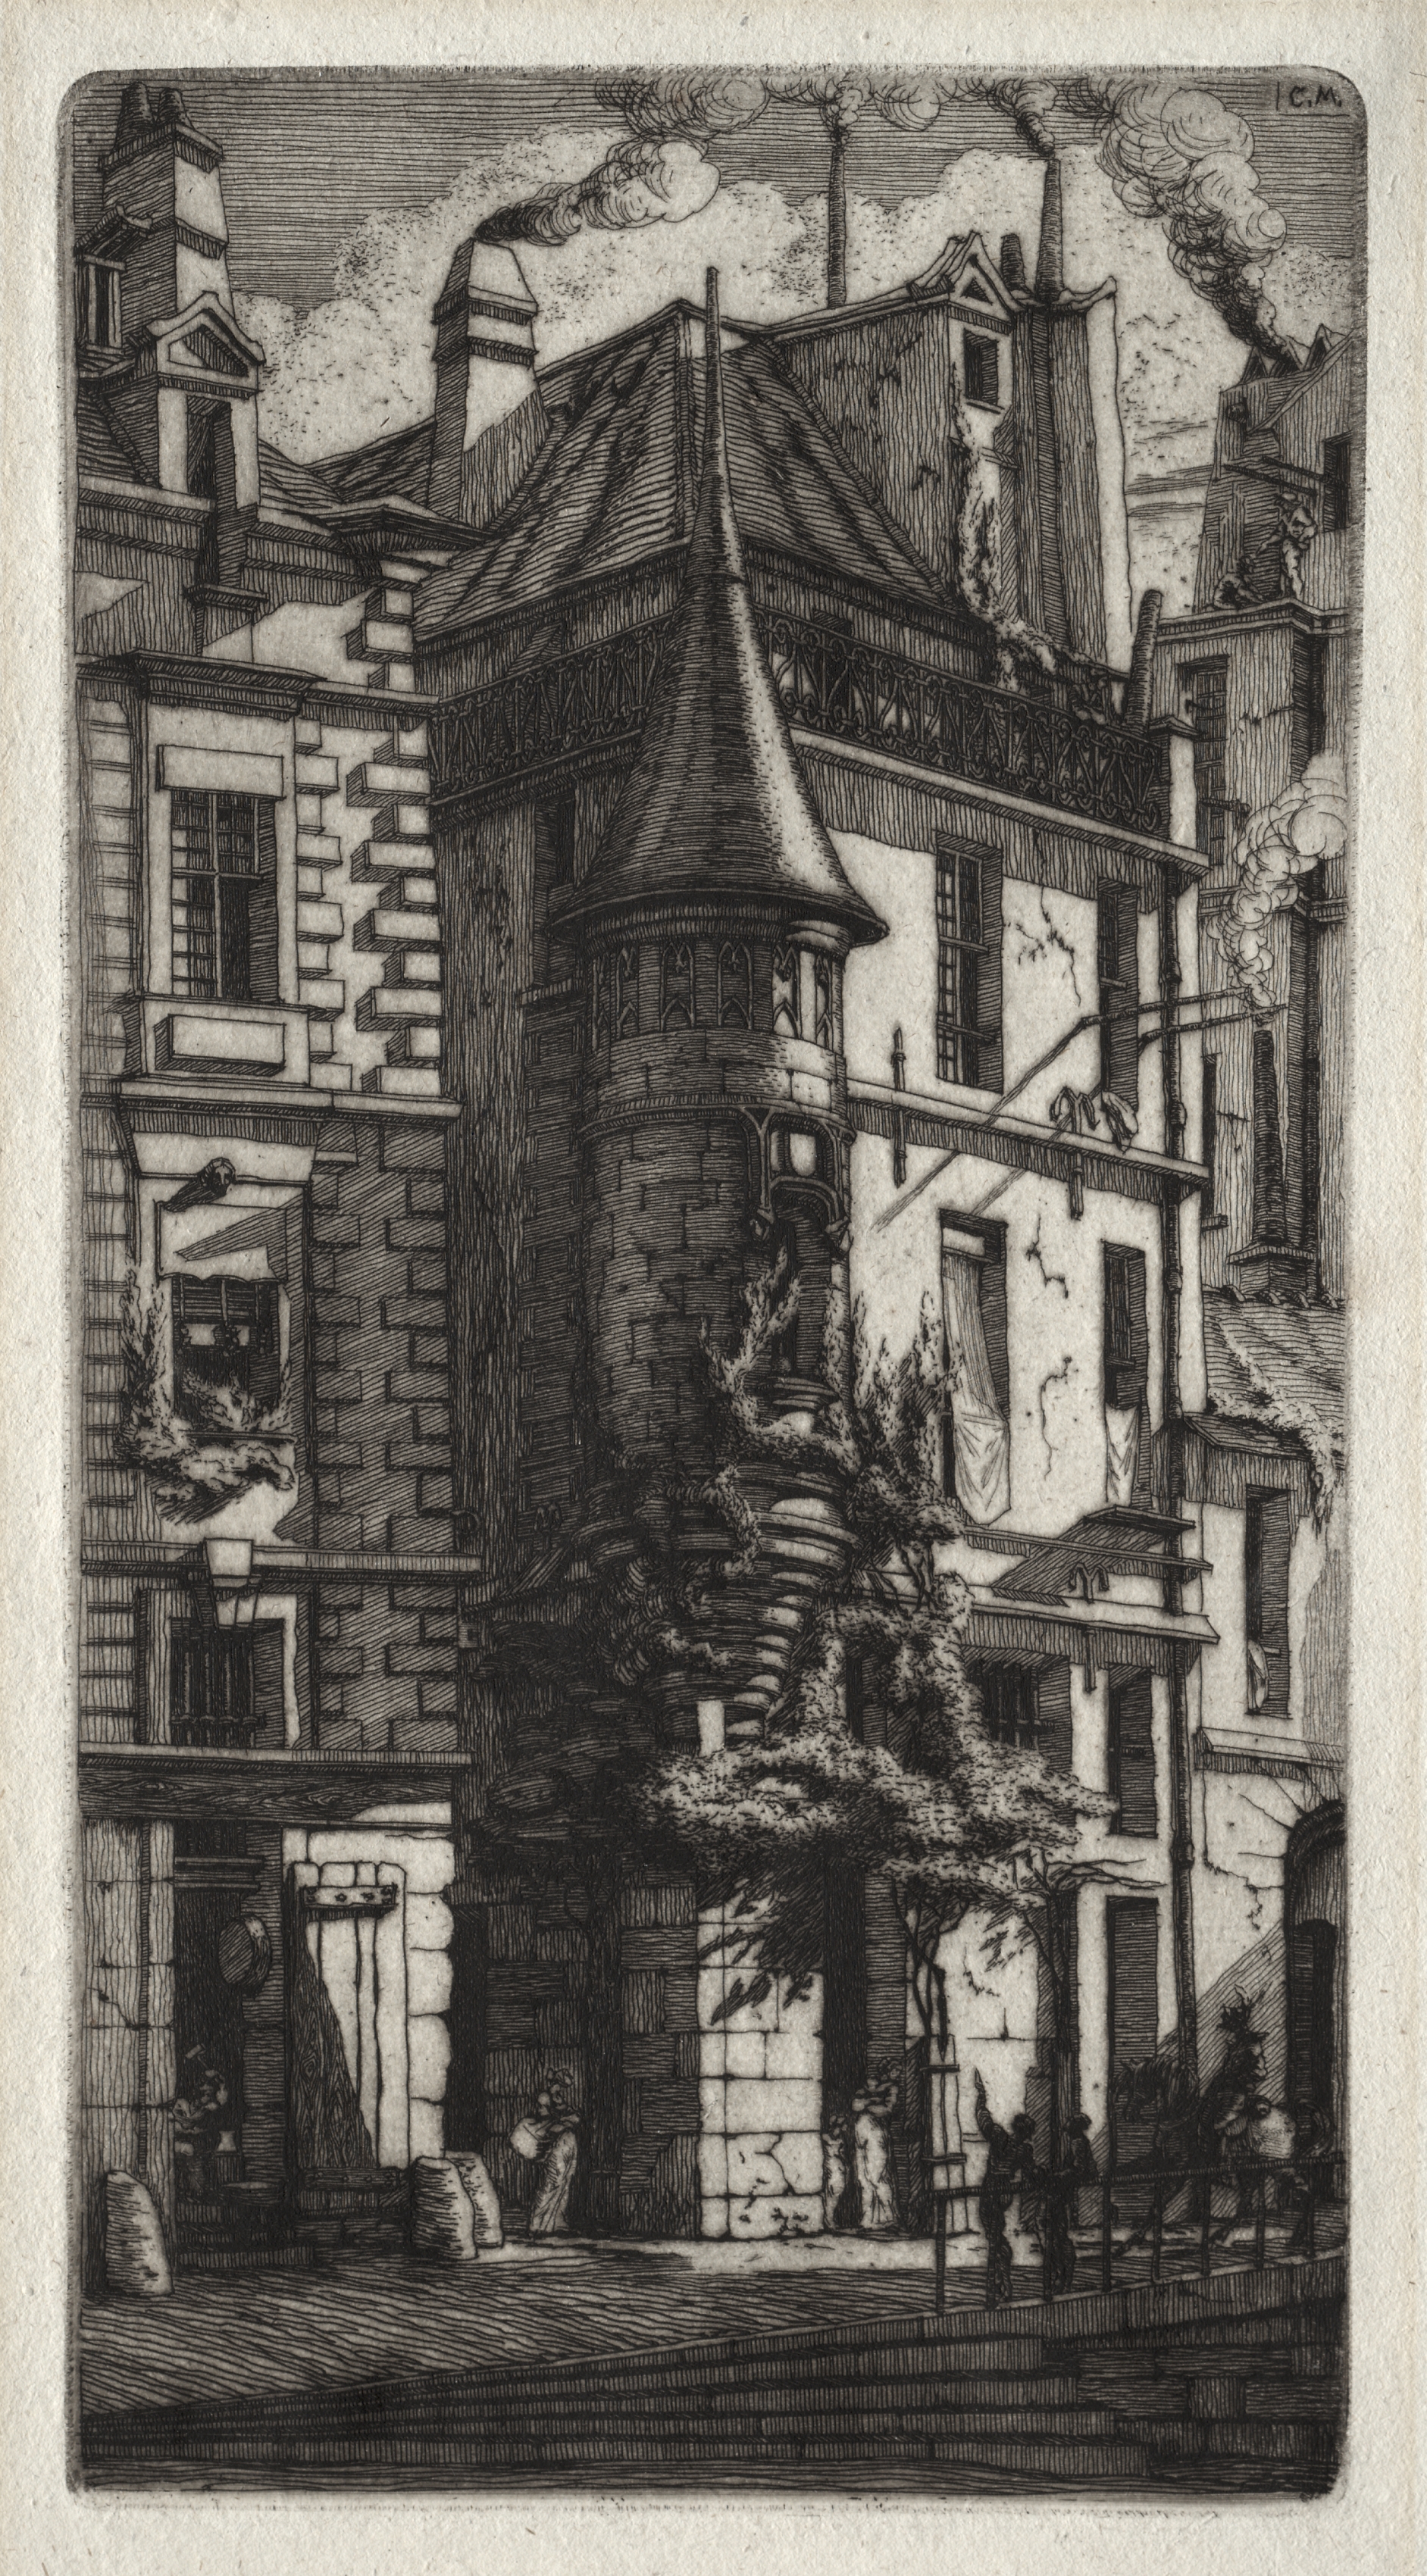 Etchings of Paris:  House with a Turret, Weavers' Street